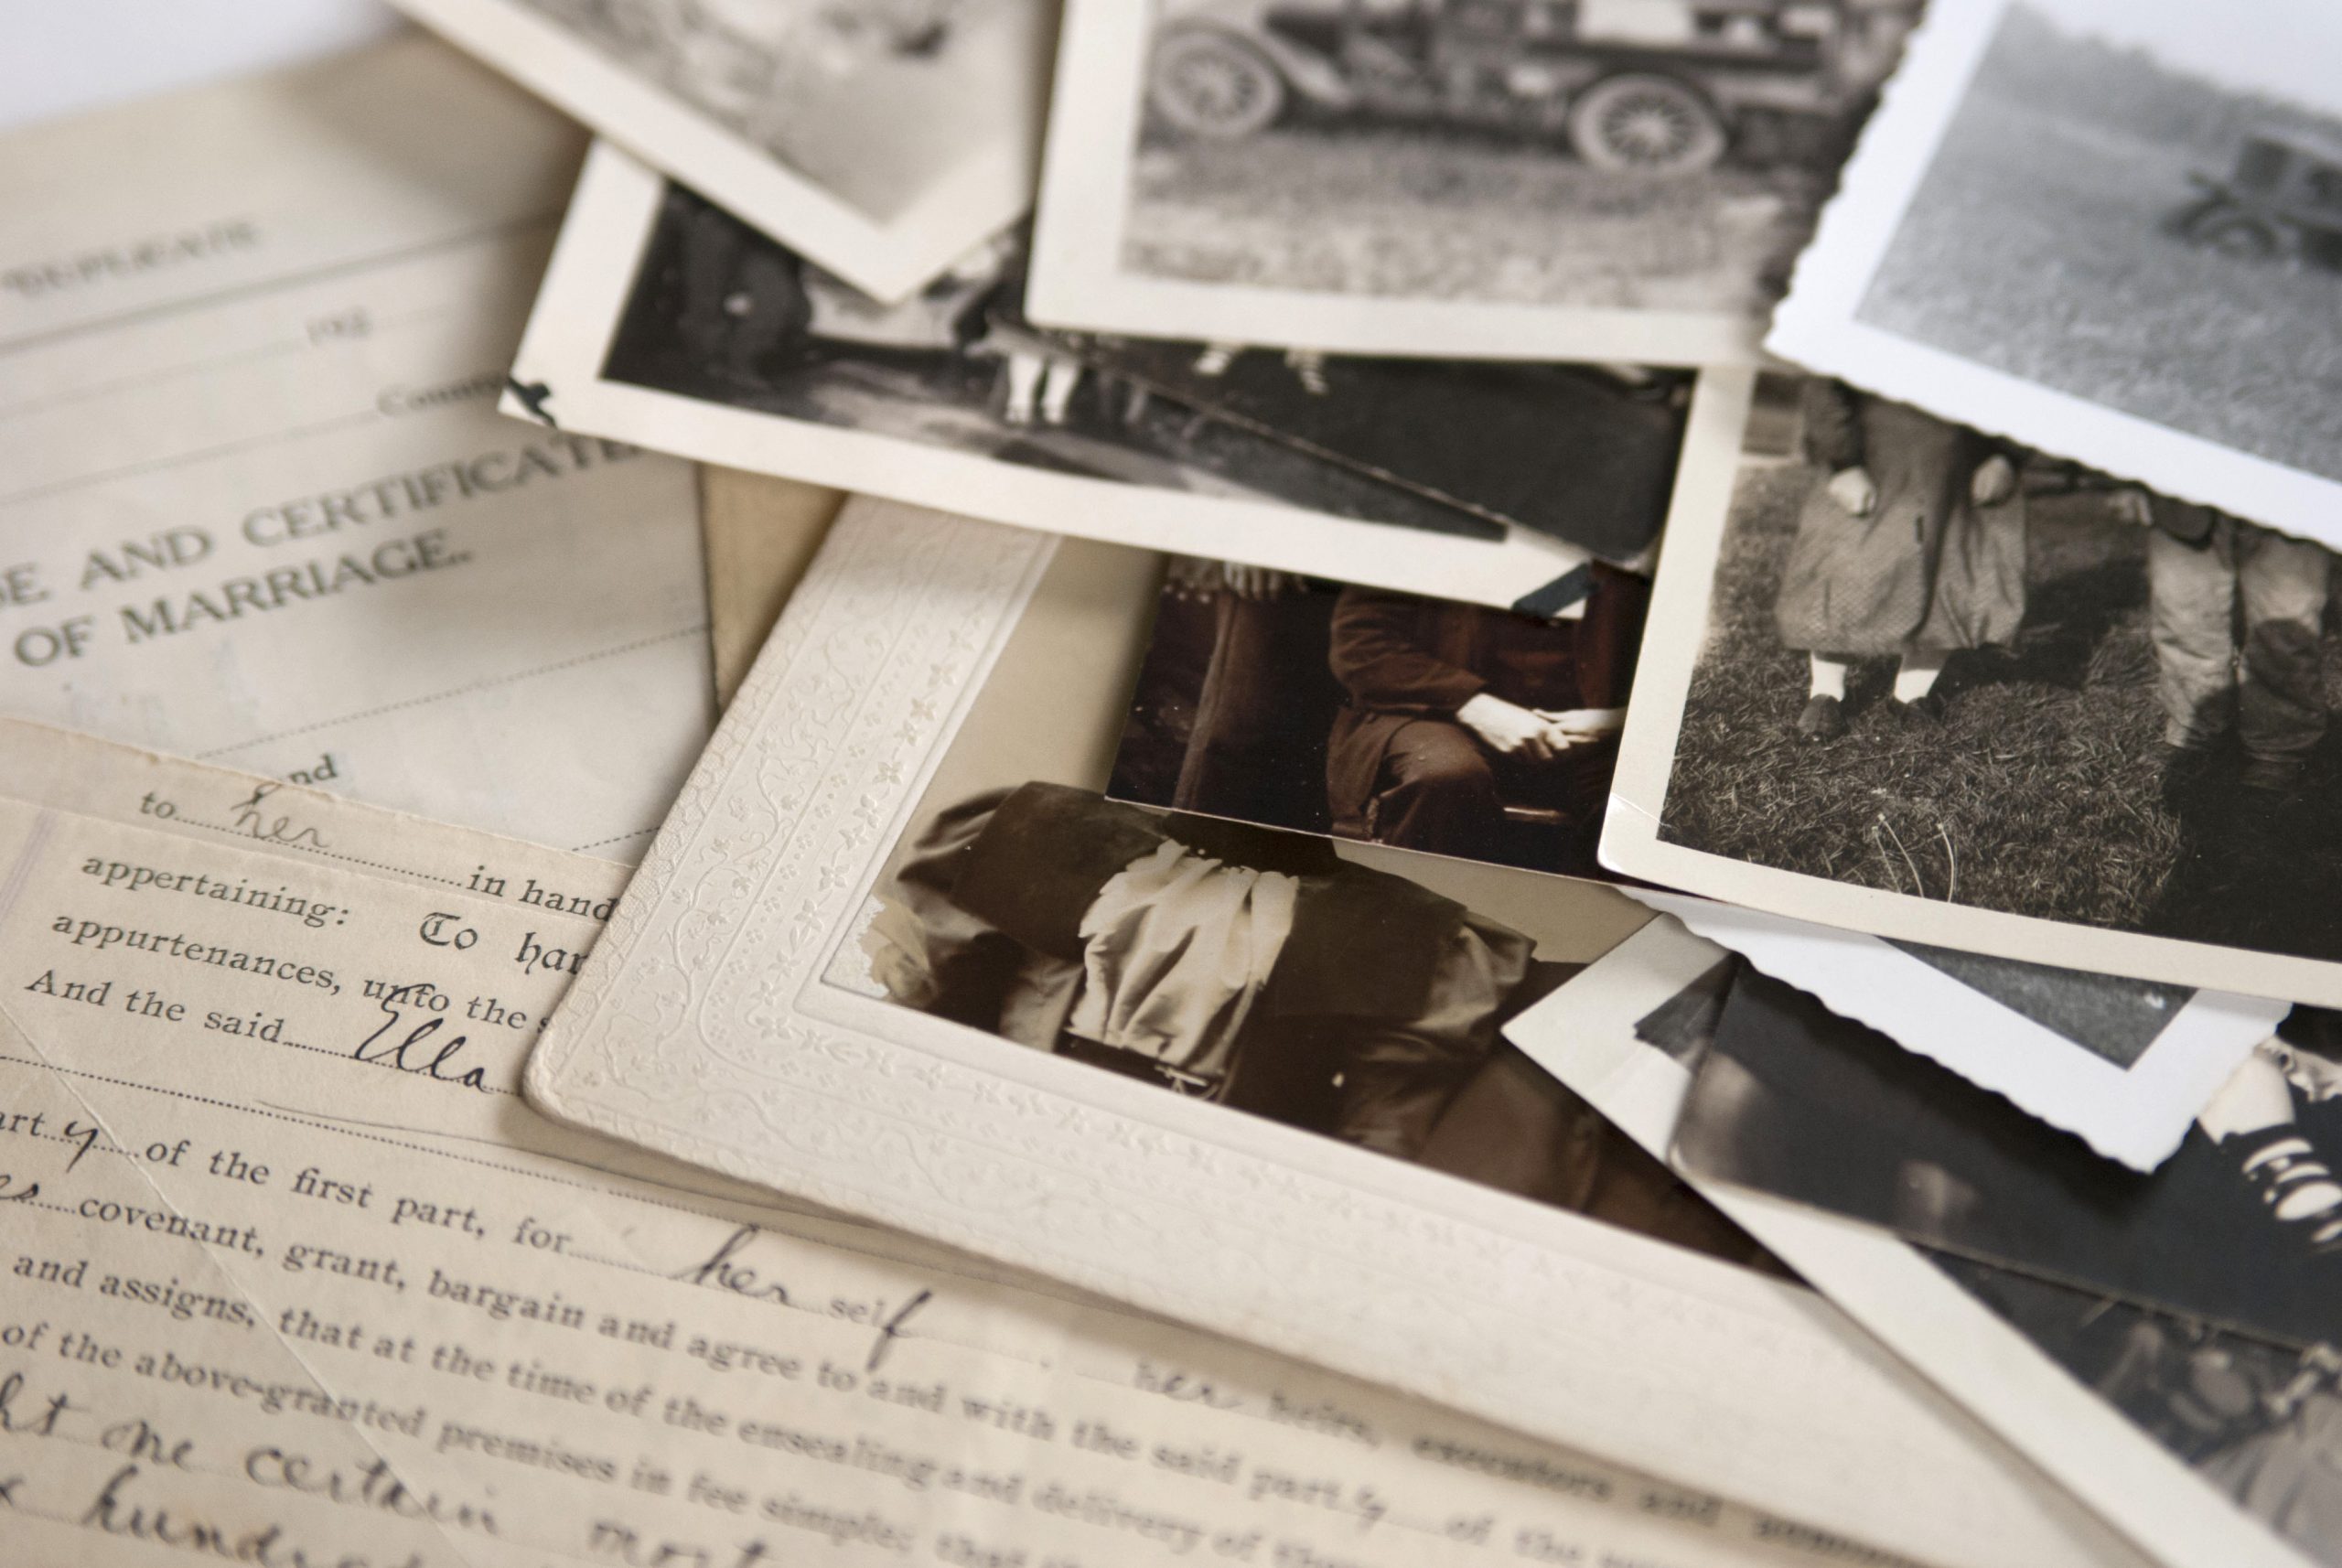 Pile of black and white photos and documents for a biography or autobiography